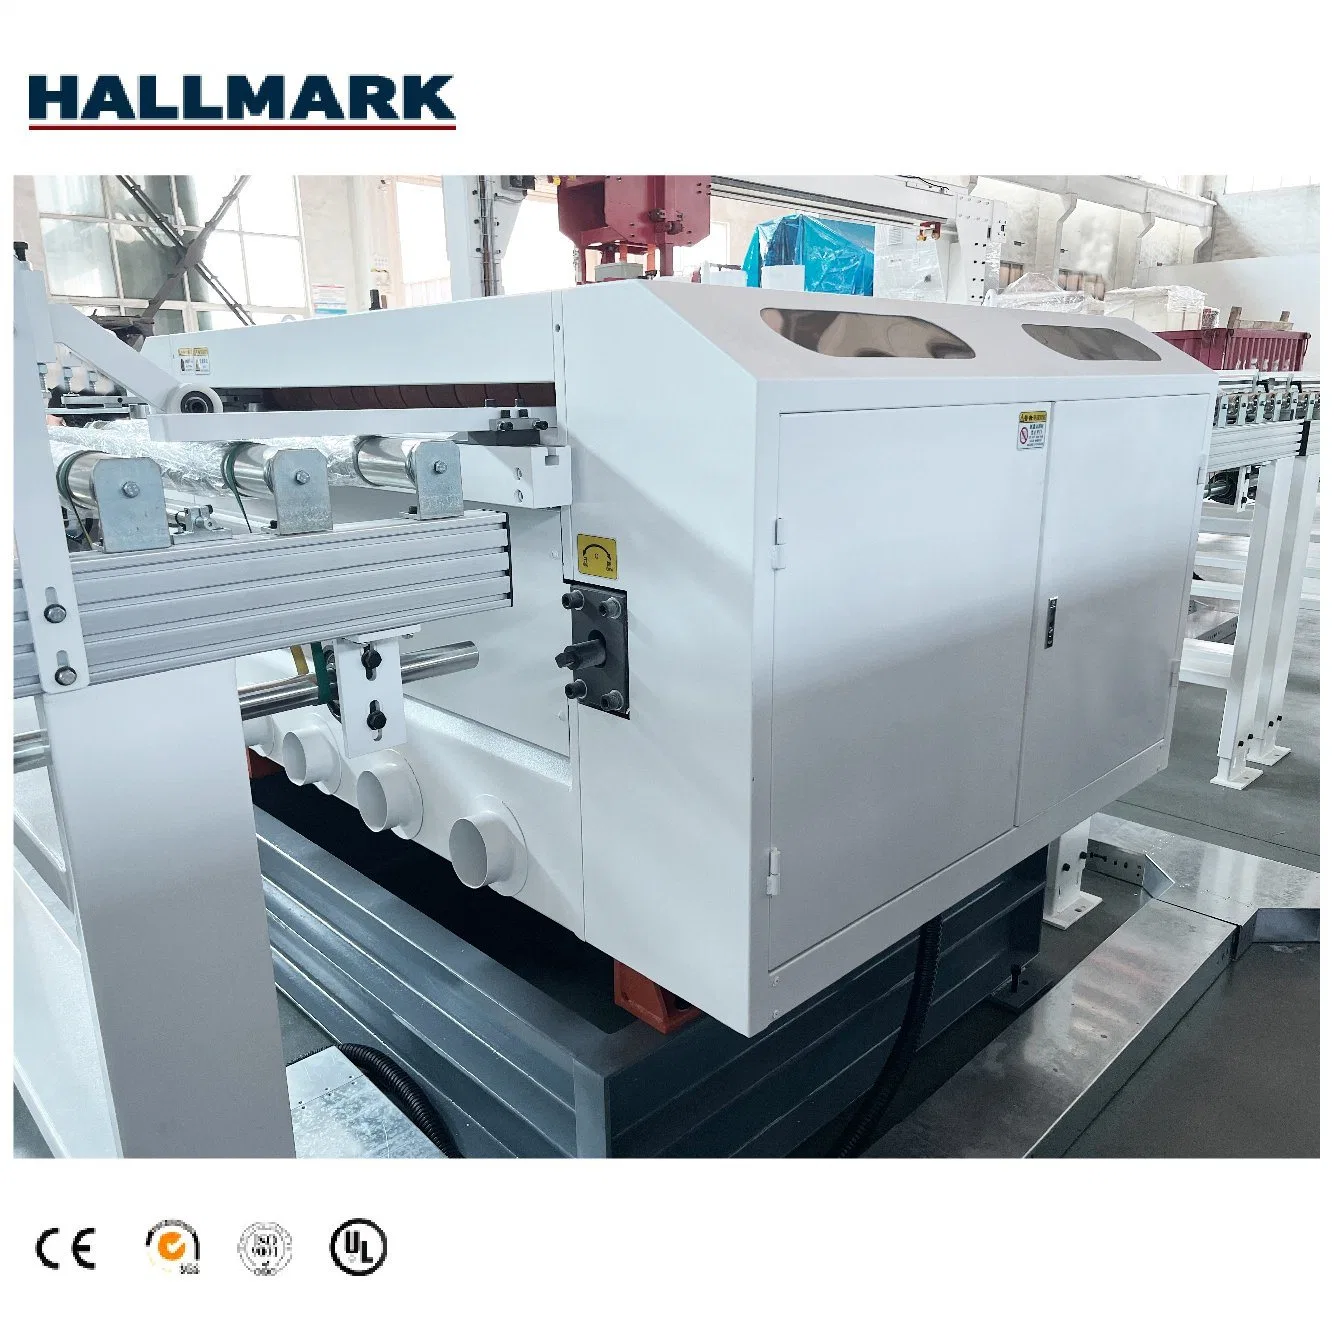 Hallmark Professional New Technology Save Power High Accuracy Multiple Rip Saw Machine for Spc Flooring Production Line